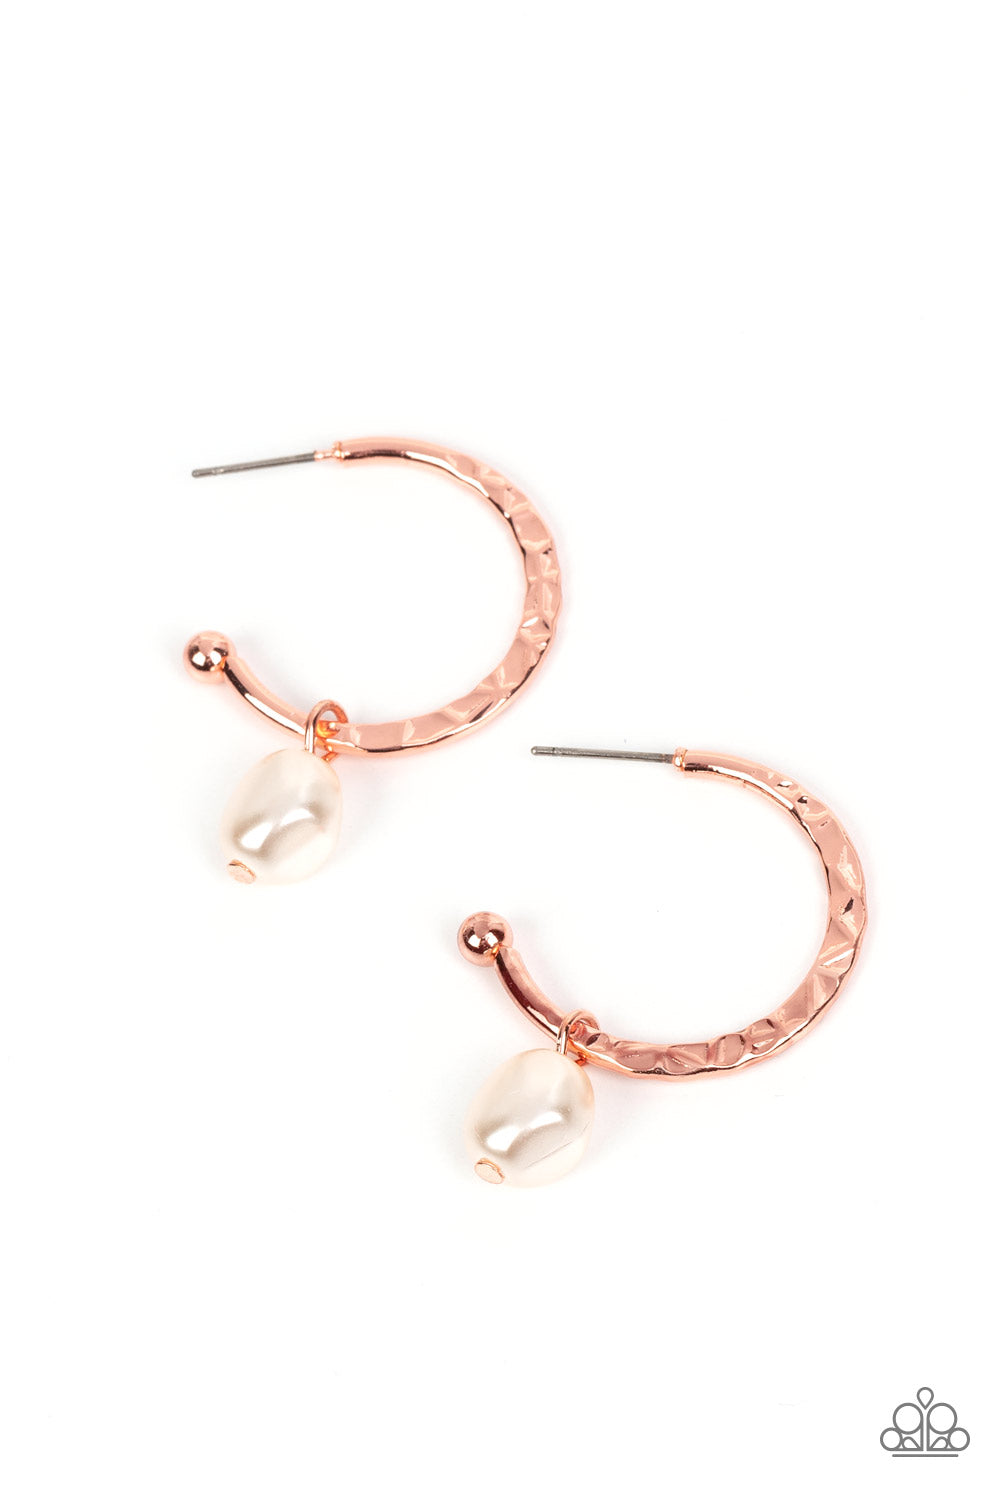 GLAM Overboard Copper Hoop Earring - Paparazzi Accessories  An imperfect white pearl glides along a hammered shiny copper hoop, creating a timeless twist. Earring attaches to a standard post fitting. Hoop measures approximately 1" in diameter.  Sold as one pair of hoop earrings.  P5HO-CPSH-159XX